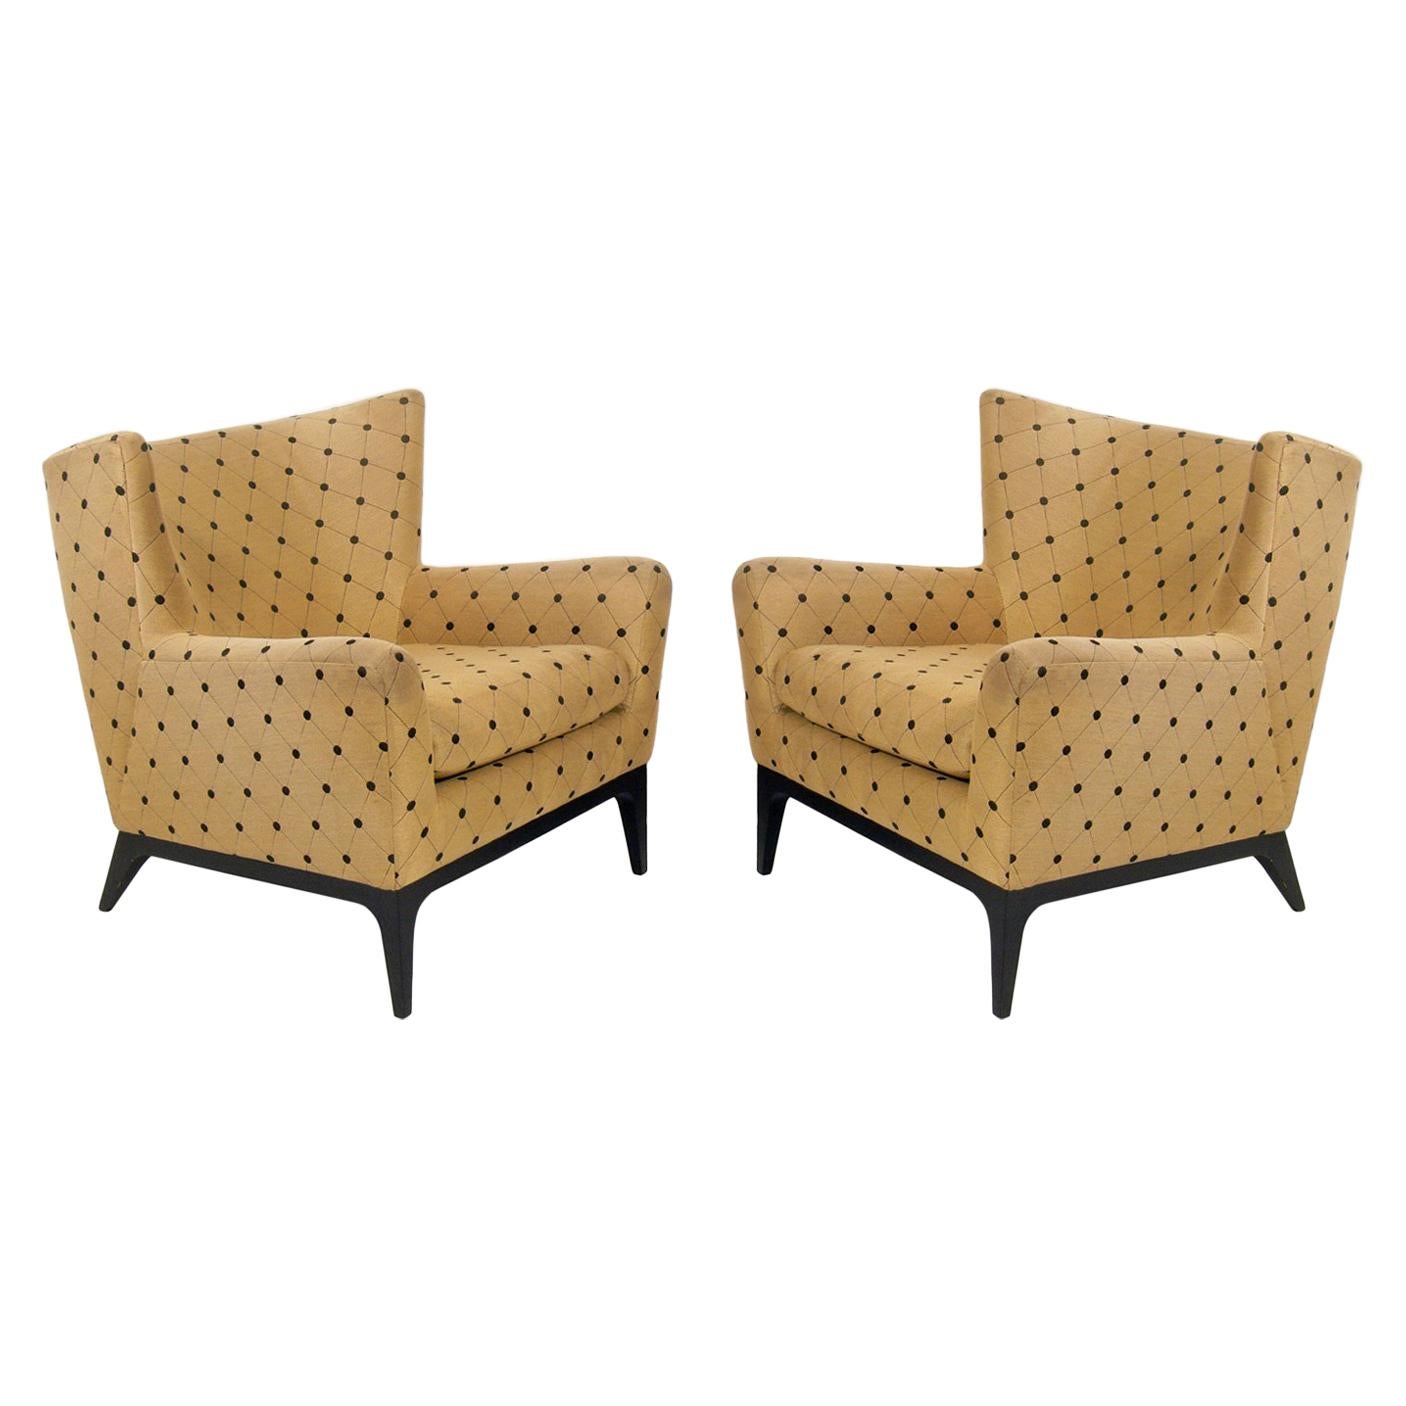 Pair of Curvaceous Modern Lounge Chairs